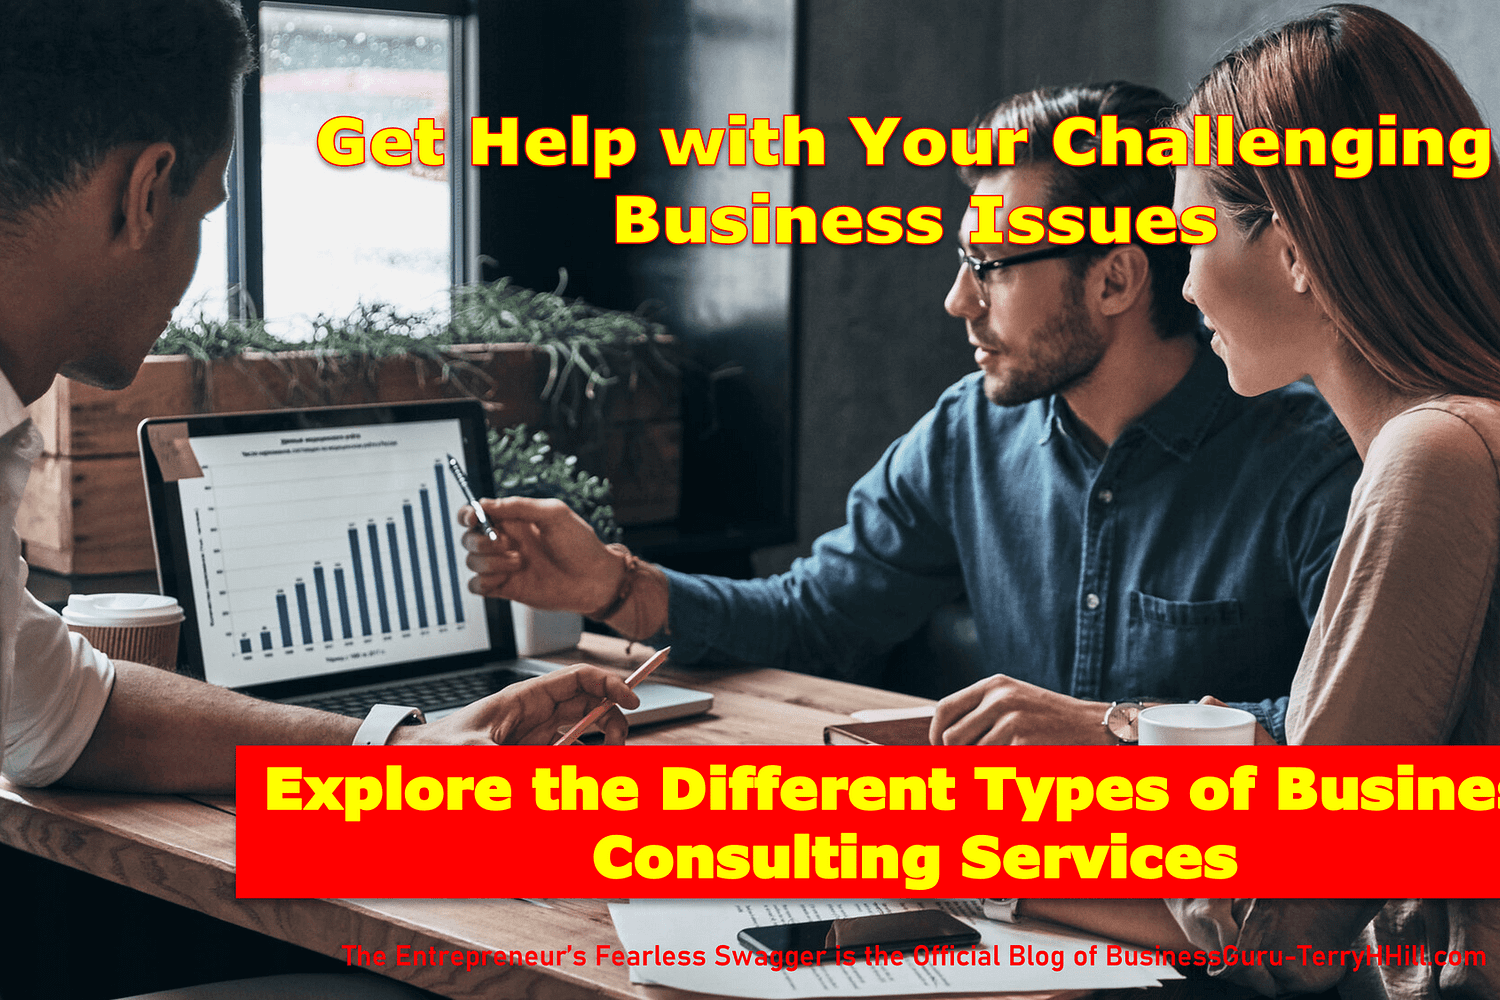 Image-Get Help with Your Challenging Issues--Explore the Different Types of Small Business Consulting Services